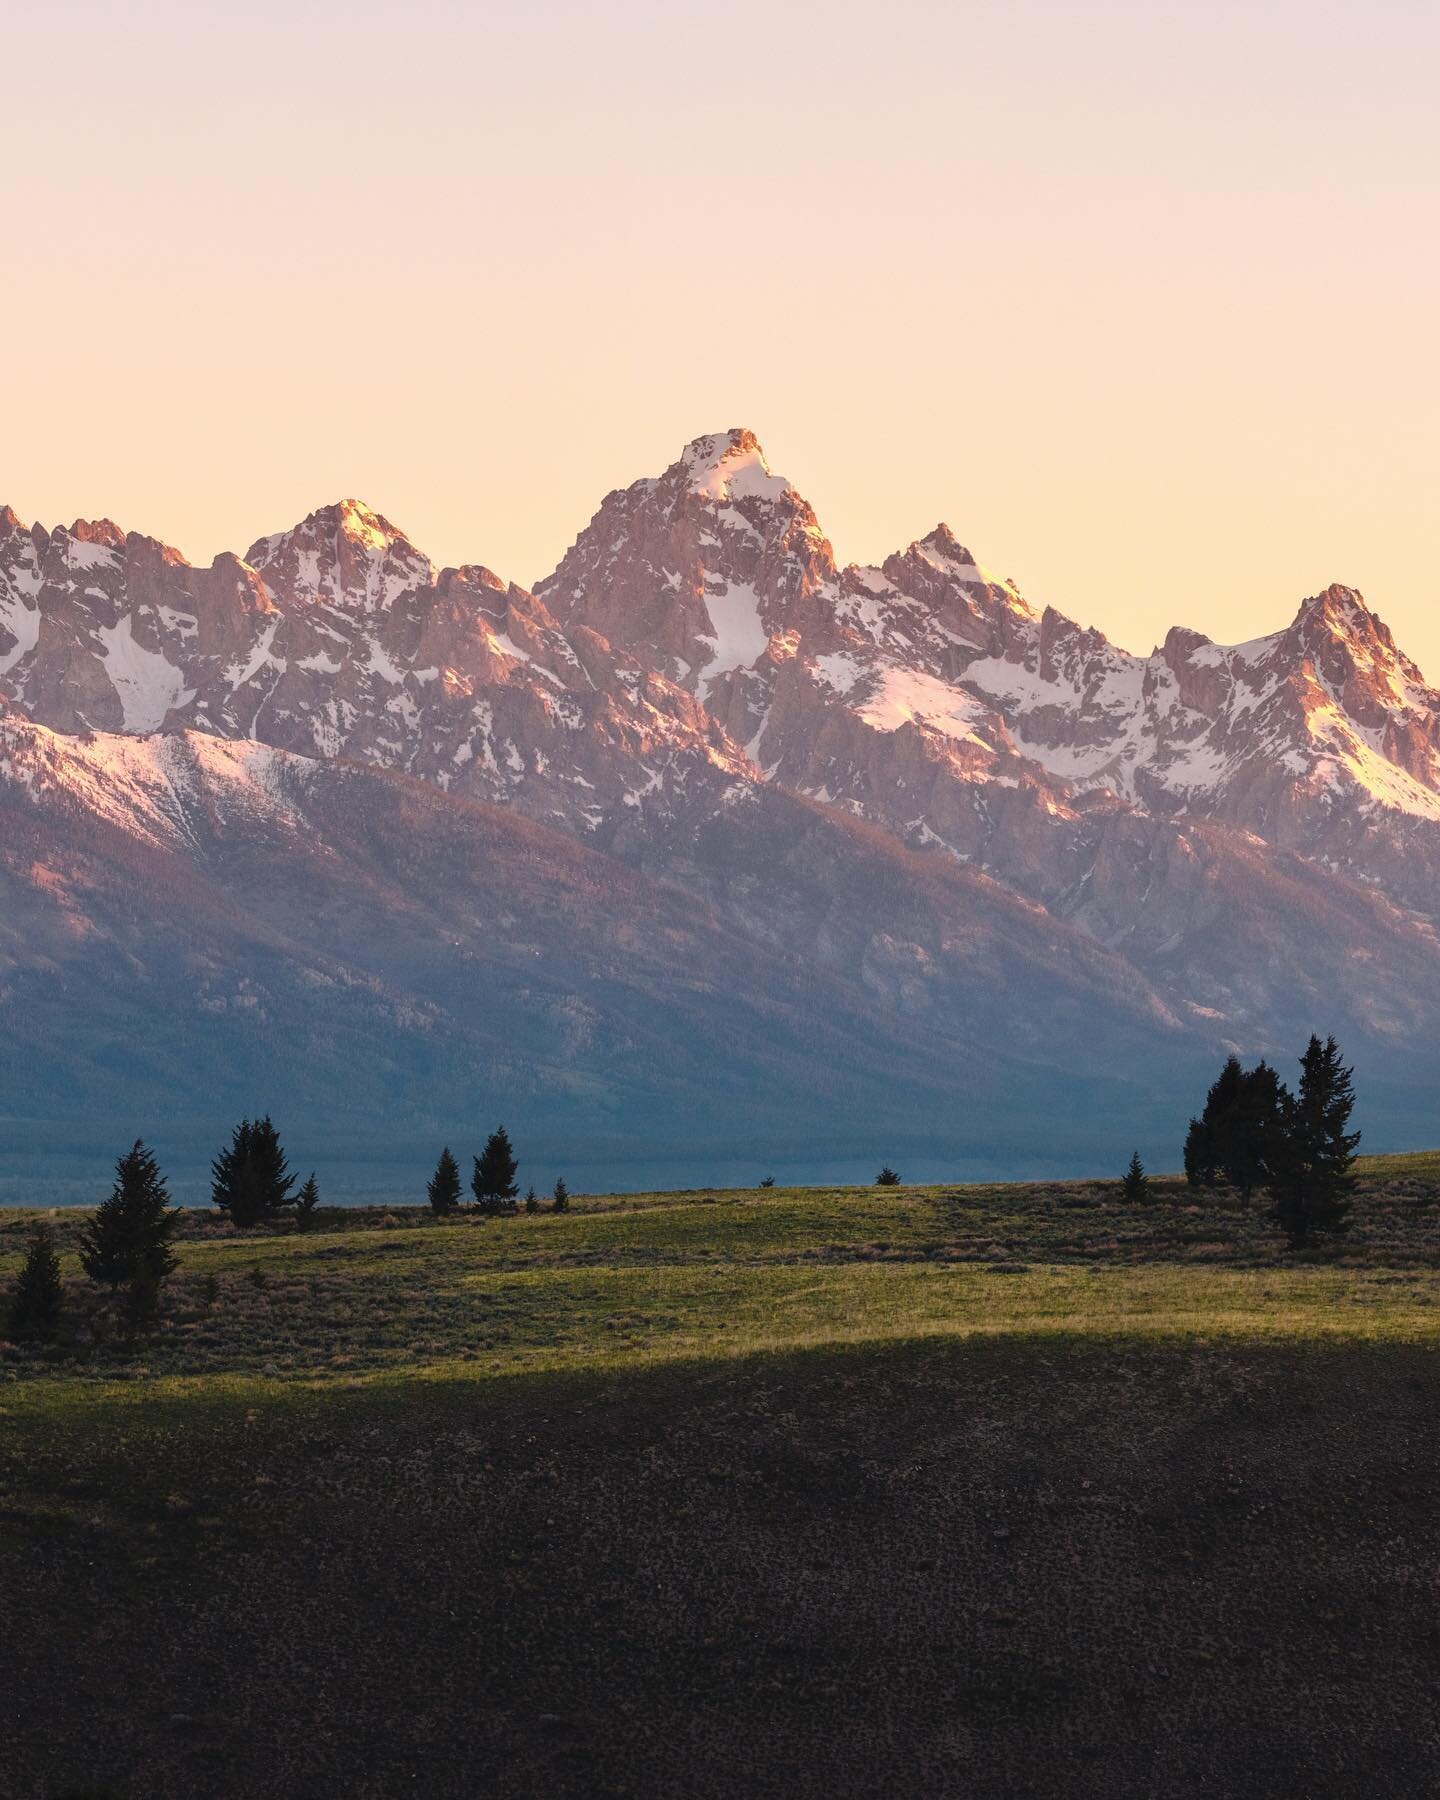 Tetons at sunrise. I&rsquo;ve been missing this place a little, and the time spent with friends among the wildflowers. It&rsquo;s a beautiful and special place. Swipe for a pano